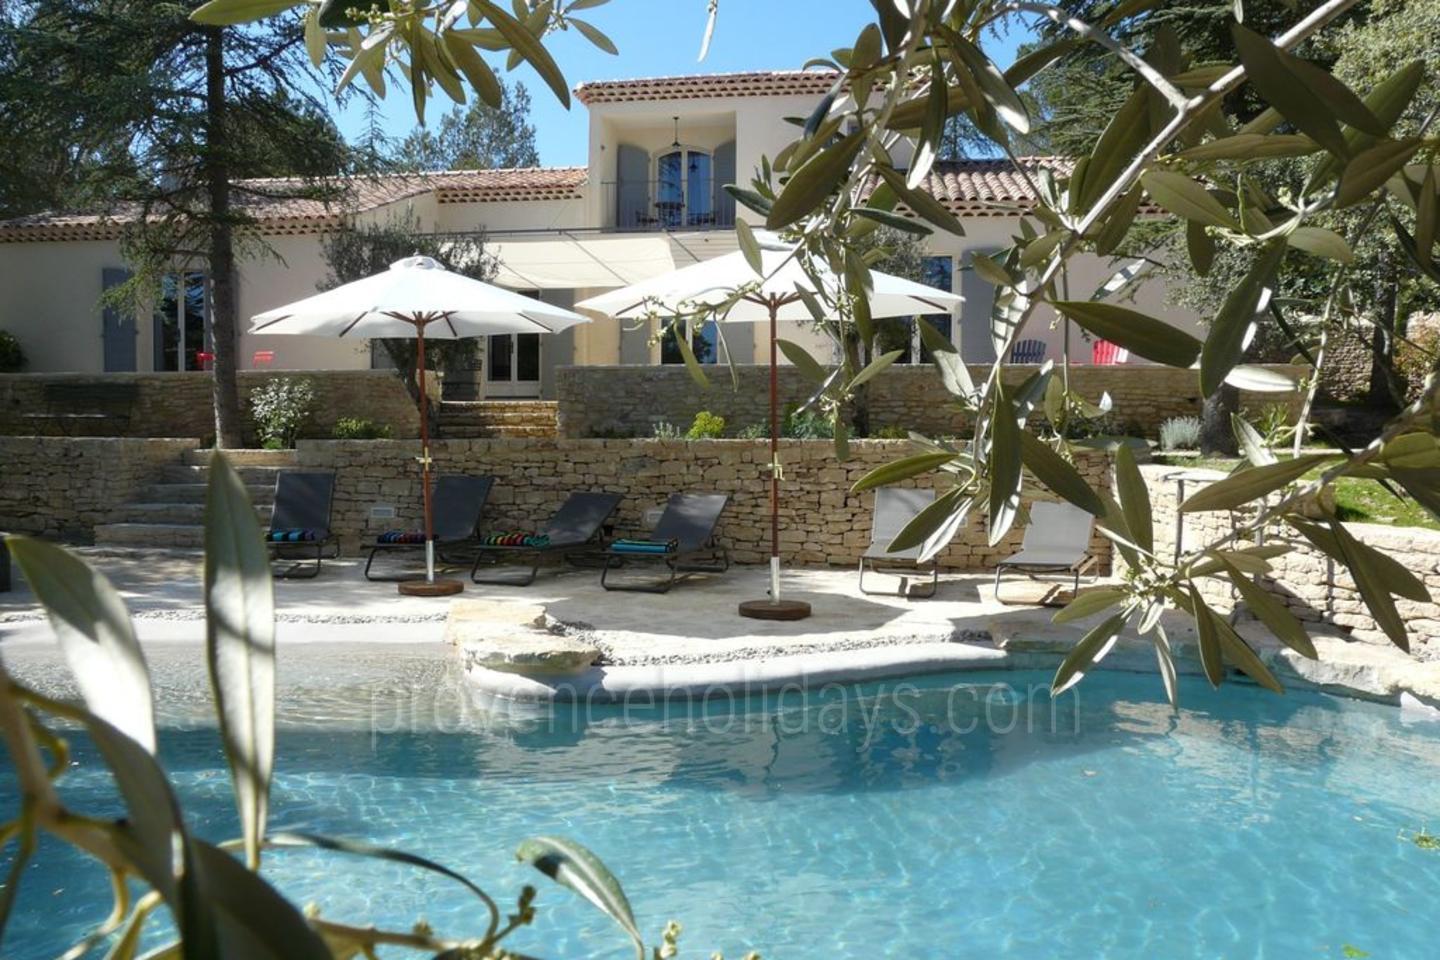 Charming Holiday Home with Private Pool near Gordes 1 - Le Mas des Cigales: Villa: Pool